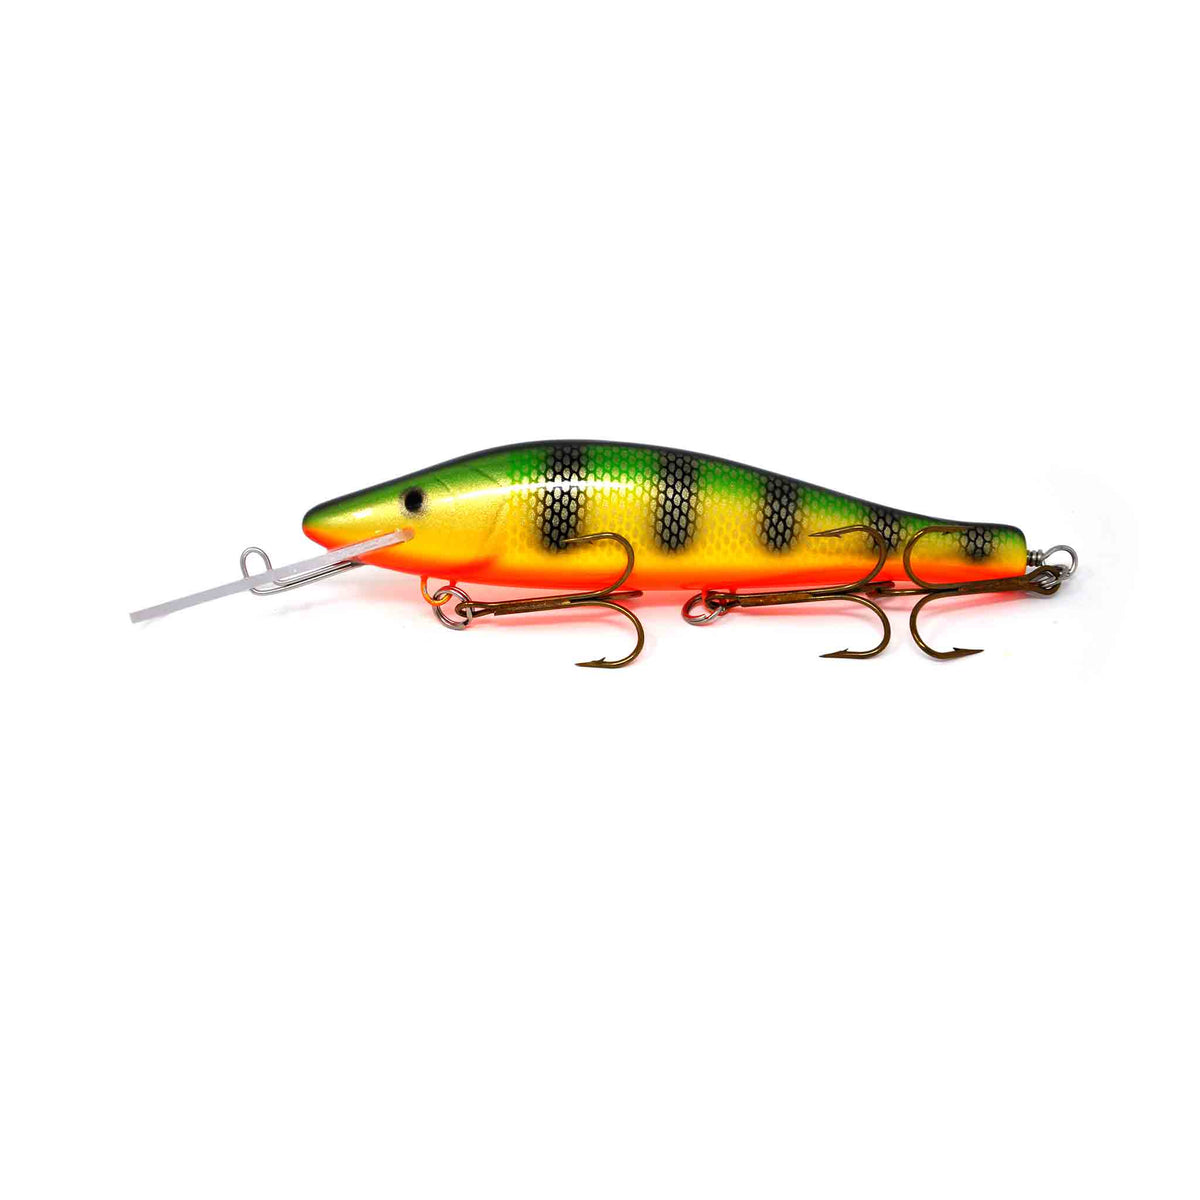 Hadden Outdoors - 🤫🤫🤫 IYKYK! One of the hottest baits